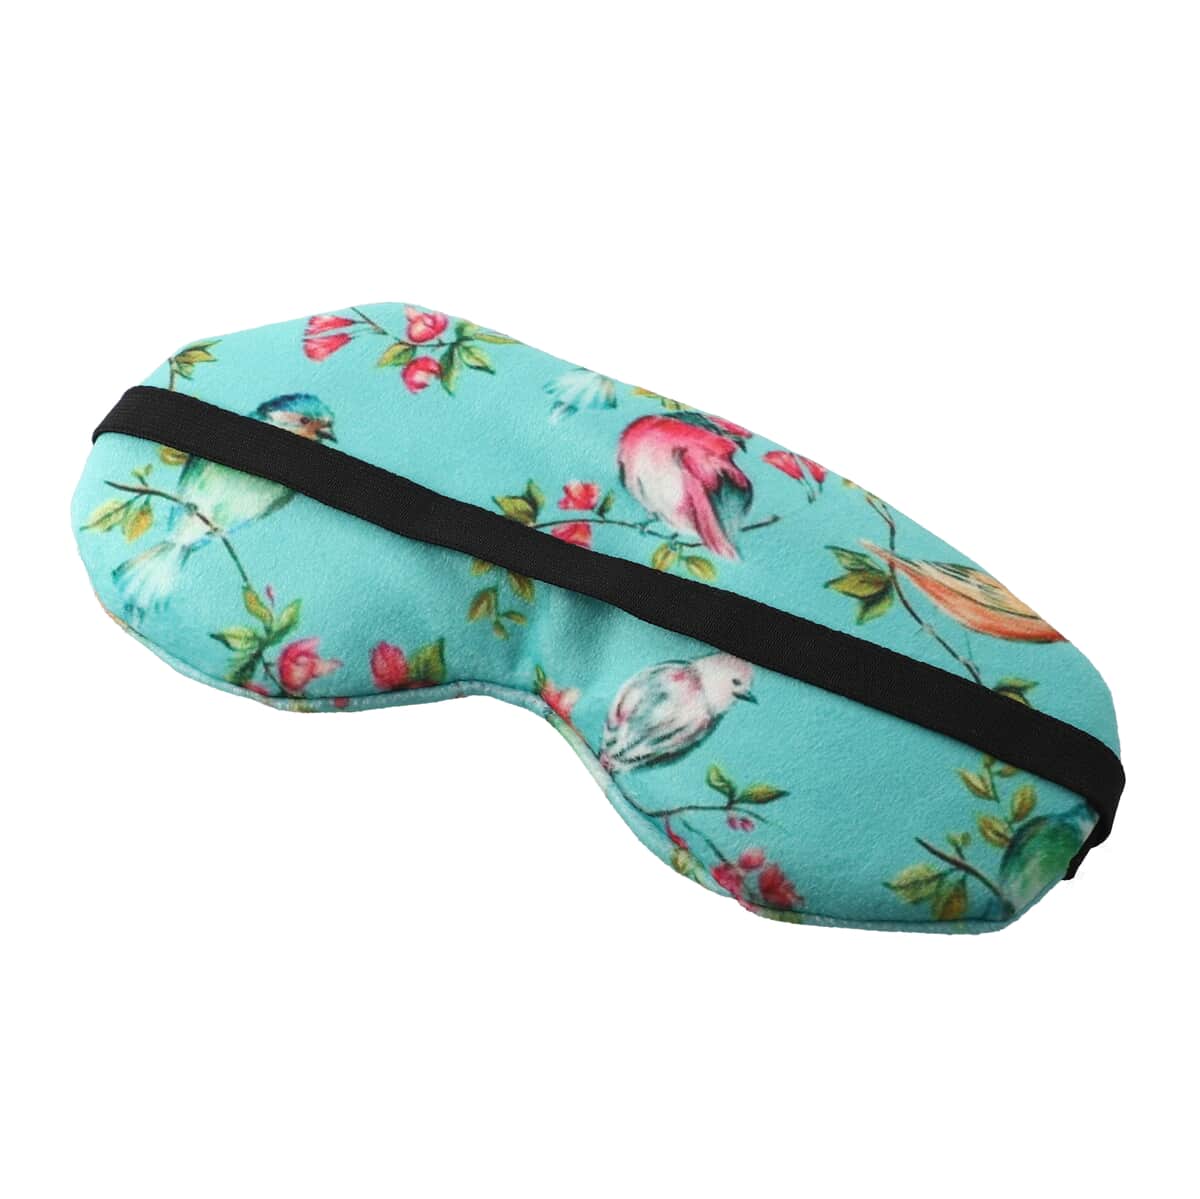 Multi Color Printed Cotton, Shungite Weighted Reusable Eye Mask (L8xW3) with Shungite Gel Sleeve and Adjustable Strap image number 3